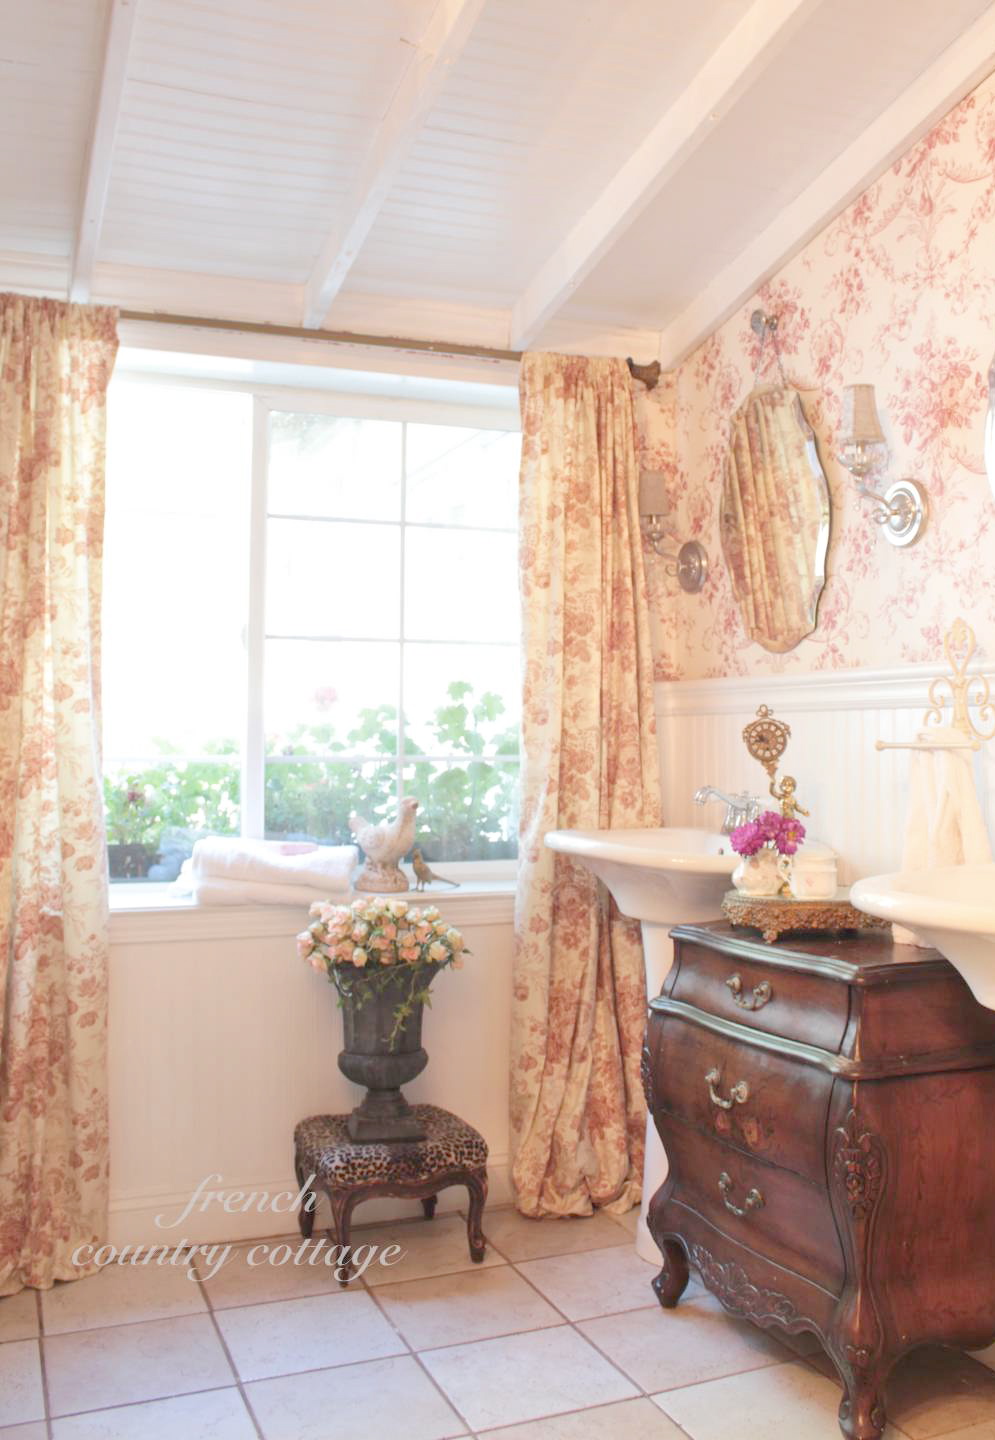 French Country Cottage Toile